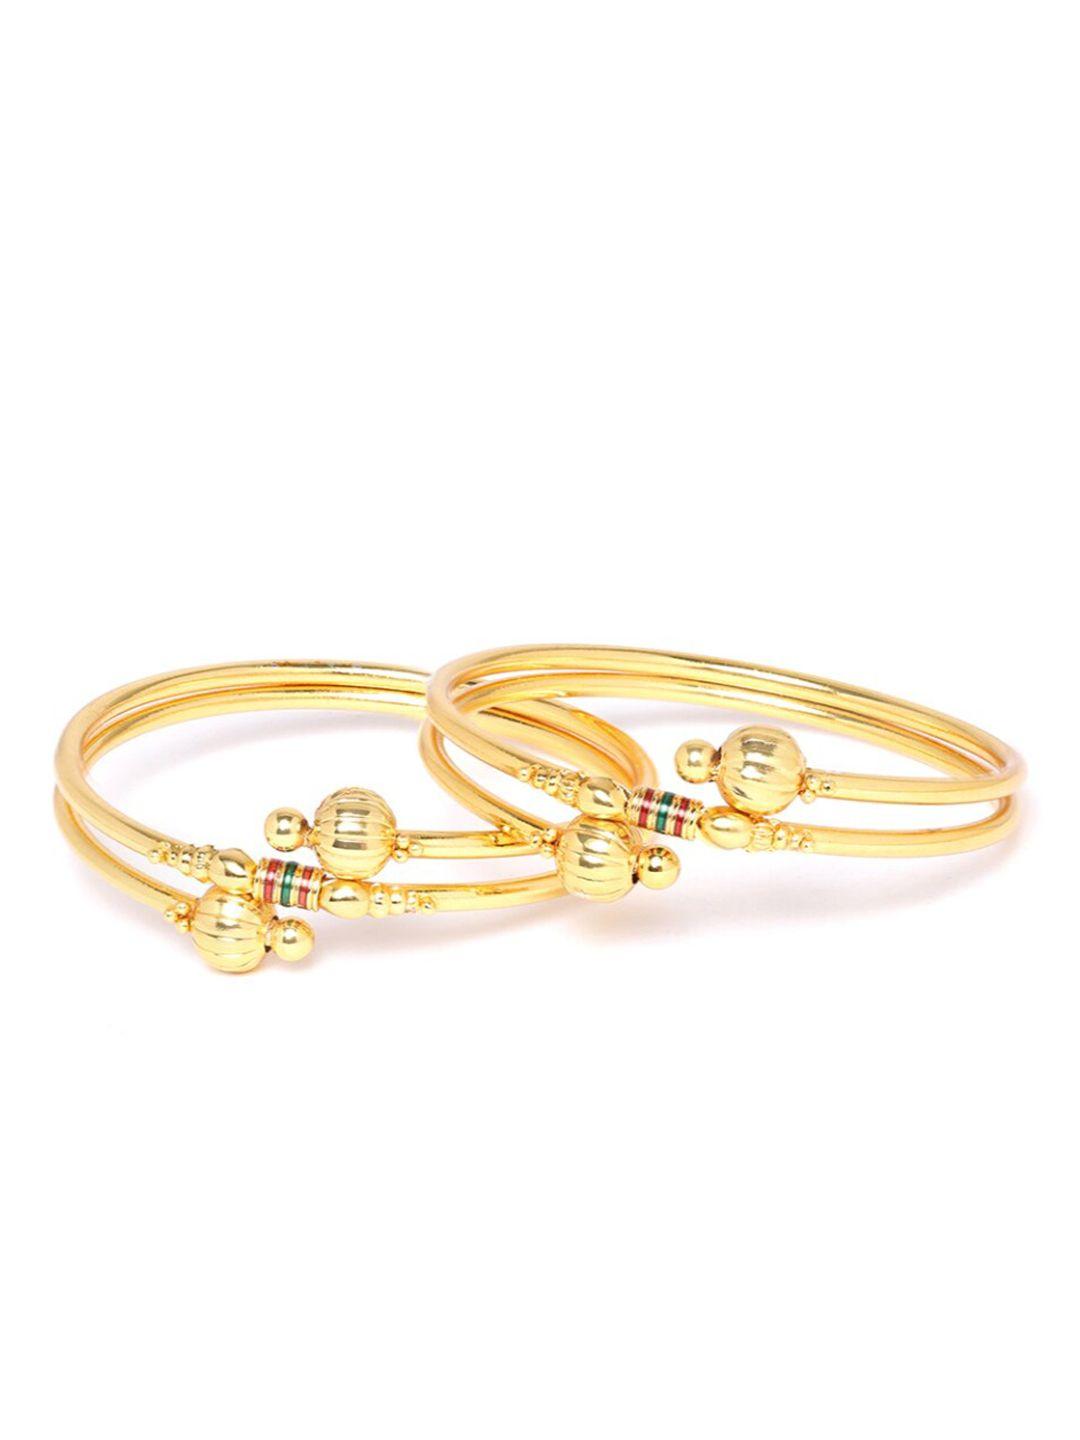 youbella set of 2 gold-plated antique bangles